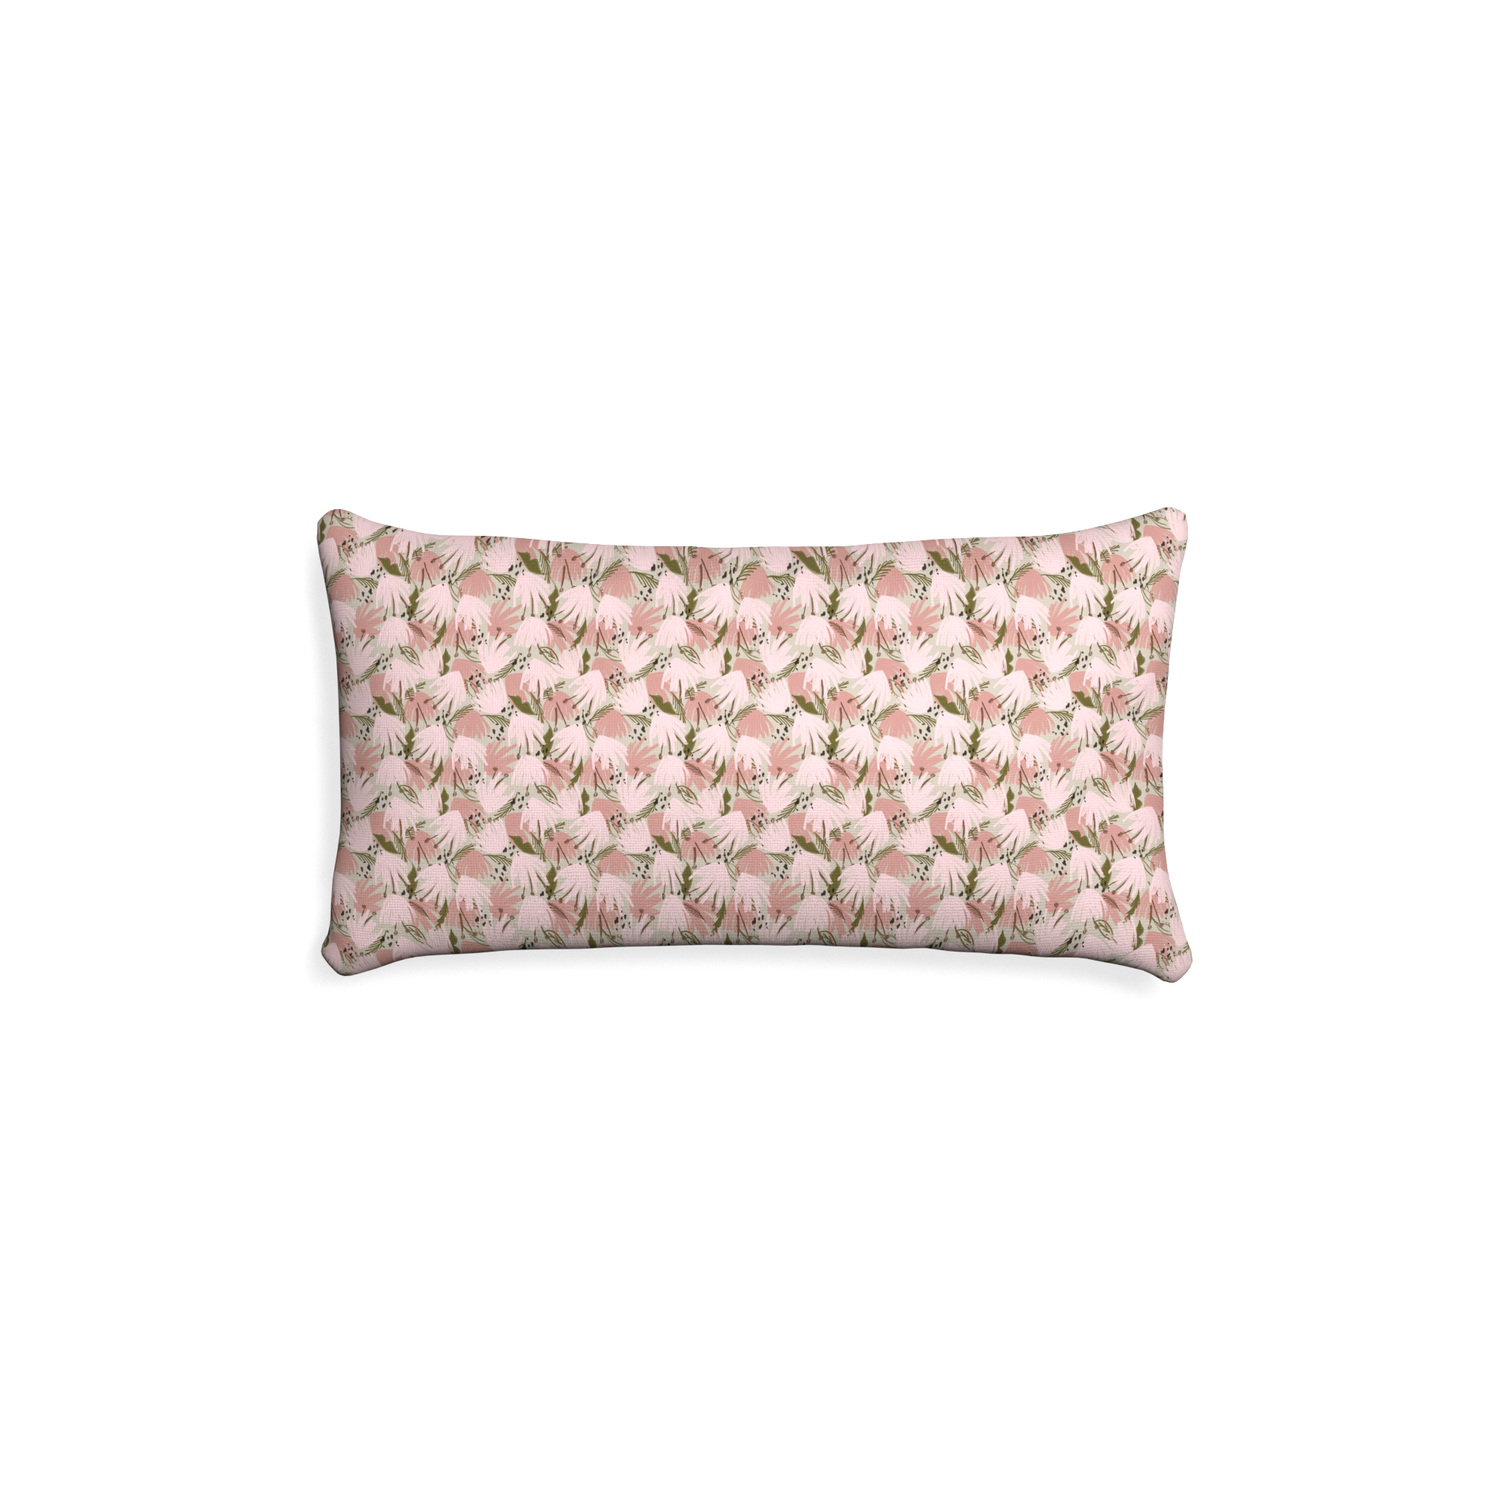 Petite-lumbar eden pink custom pink floralpillow with none on white background